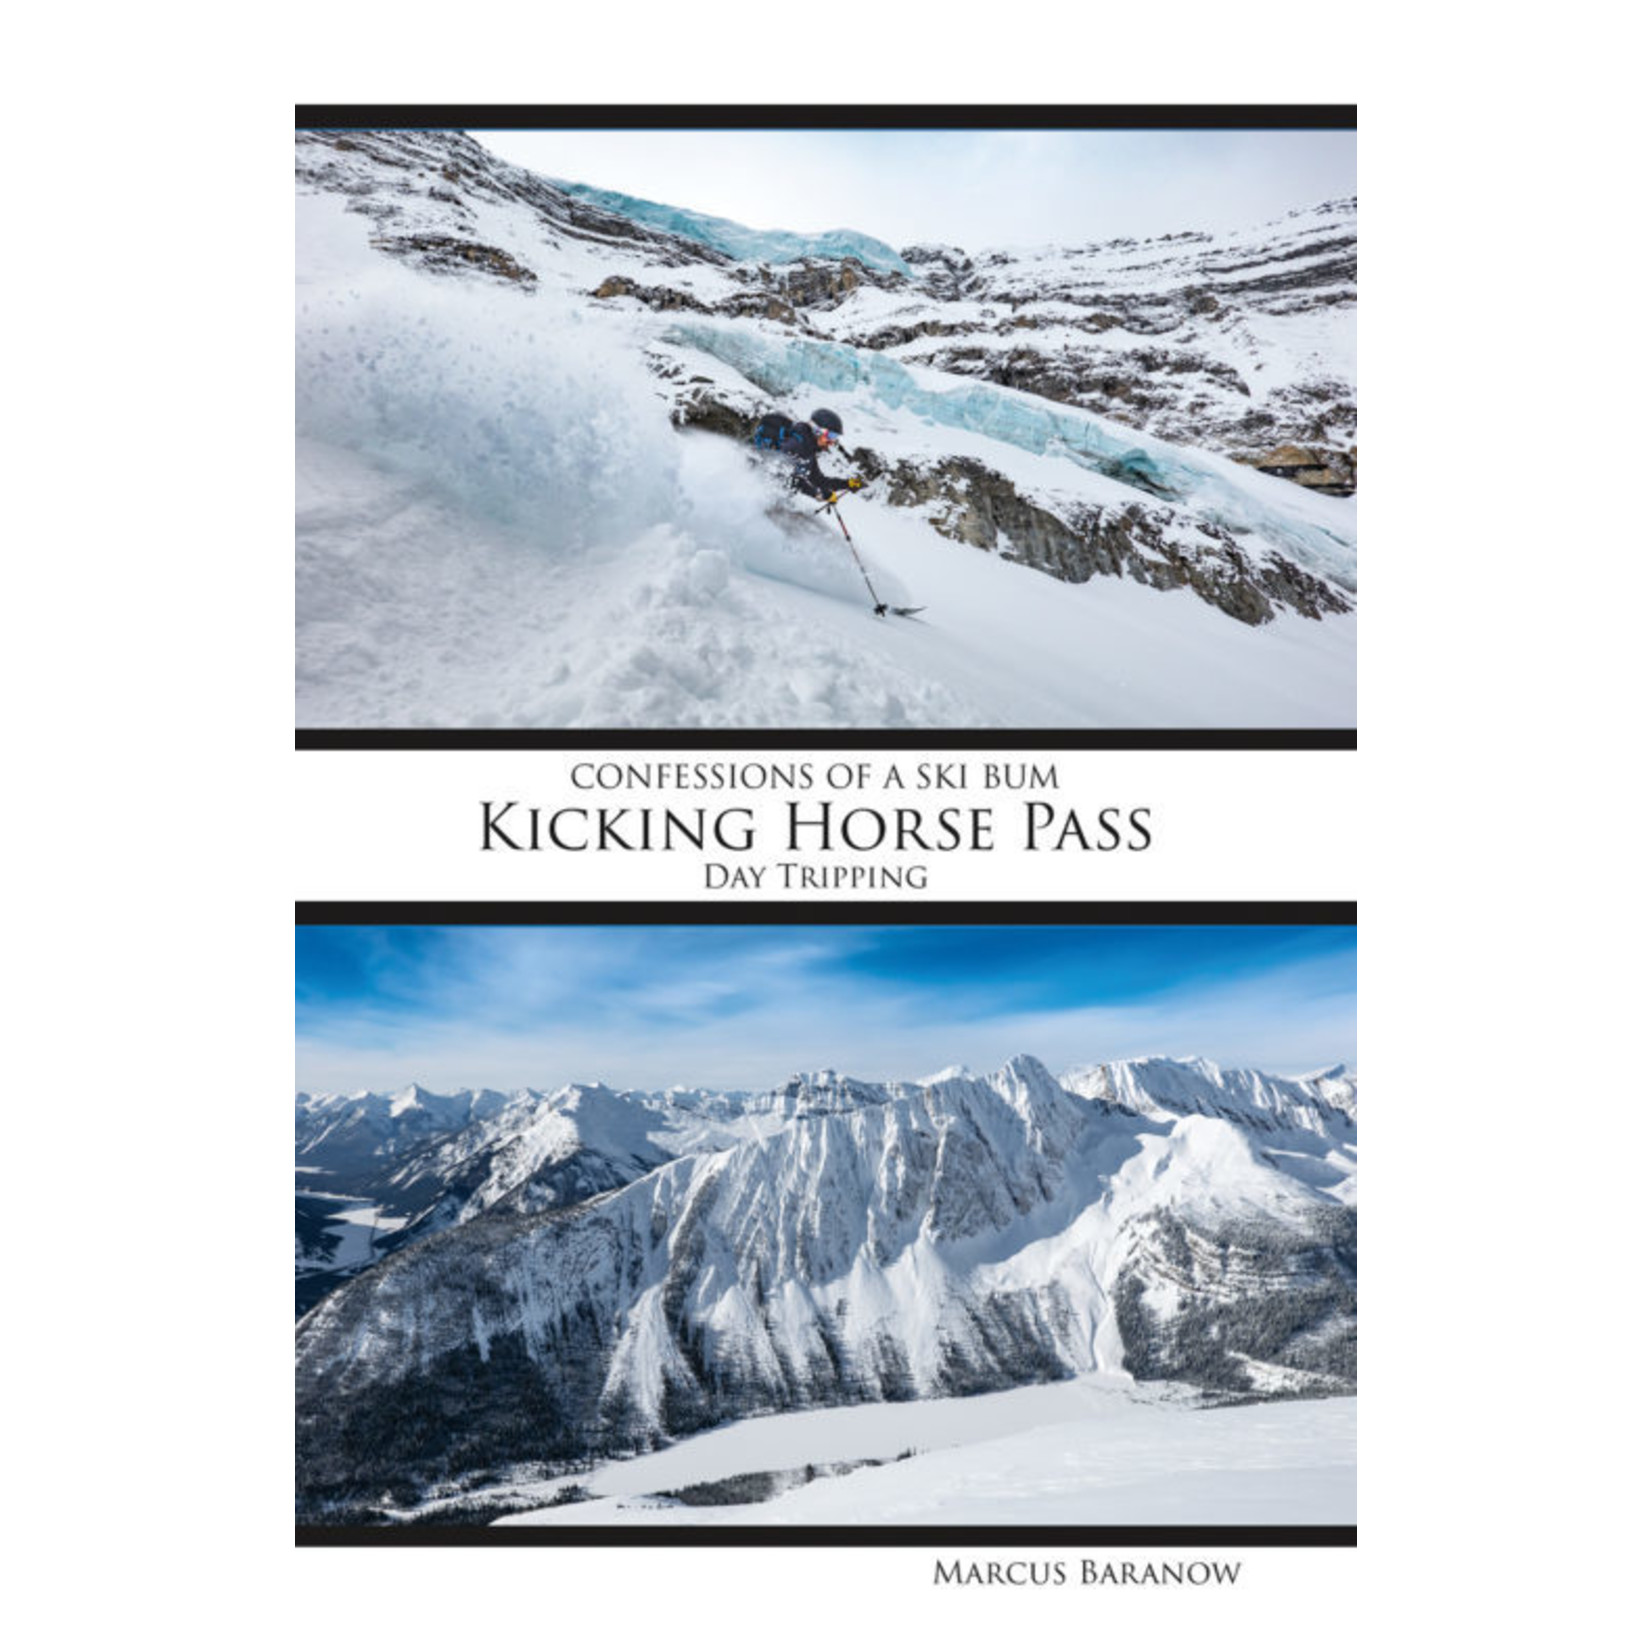 Confessions of a ski bum - Kicking Horse Pass:  Day Tripping